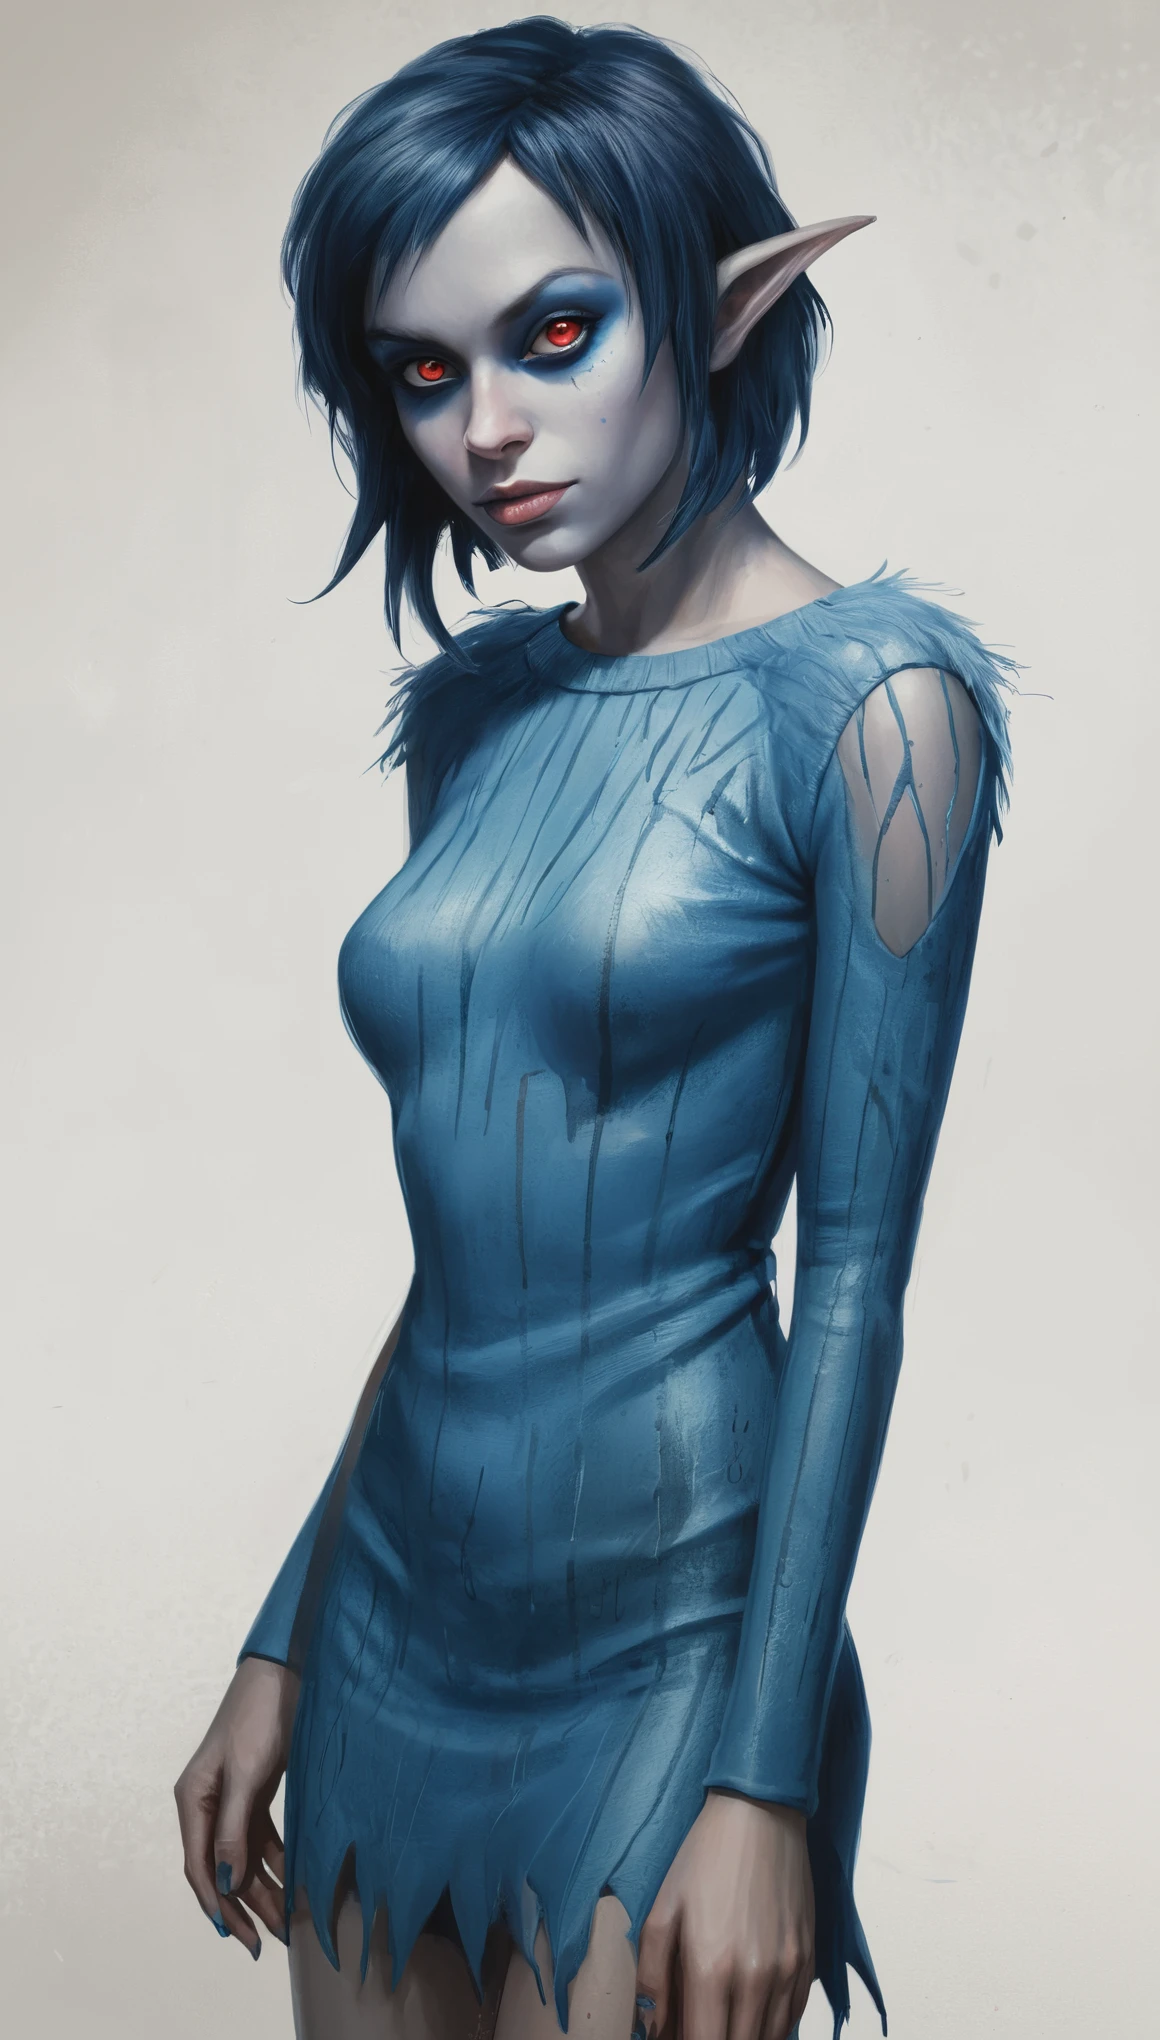 An illustrated movie poster, hand-drawn, full color, a young drow woman, drow elf, wearing a rib-knit mini-dress, blue skin, blue complexion, pointy elf ears, ruby eyes, dark hair, shaggy bob, posing like a model, hard shadows, graphite shading, stencil marks, airbrushed acrylic paint, masterpiece, in the style of Rockstar Games
